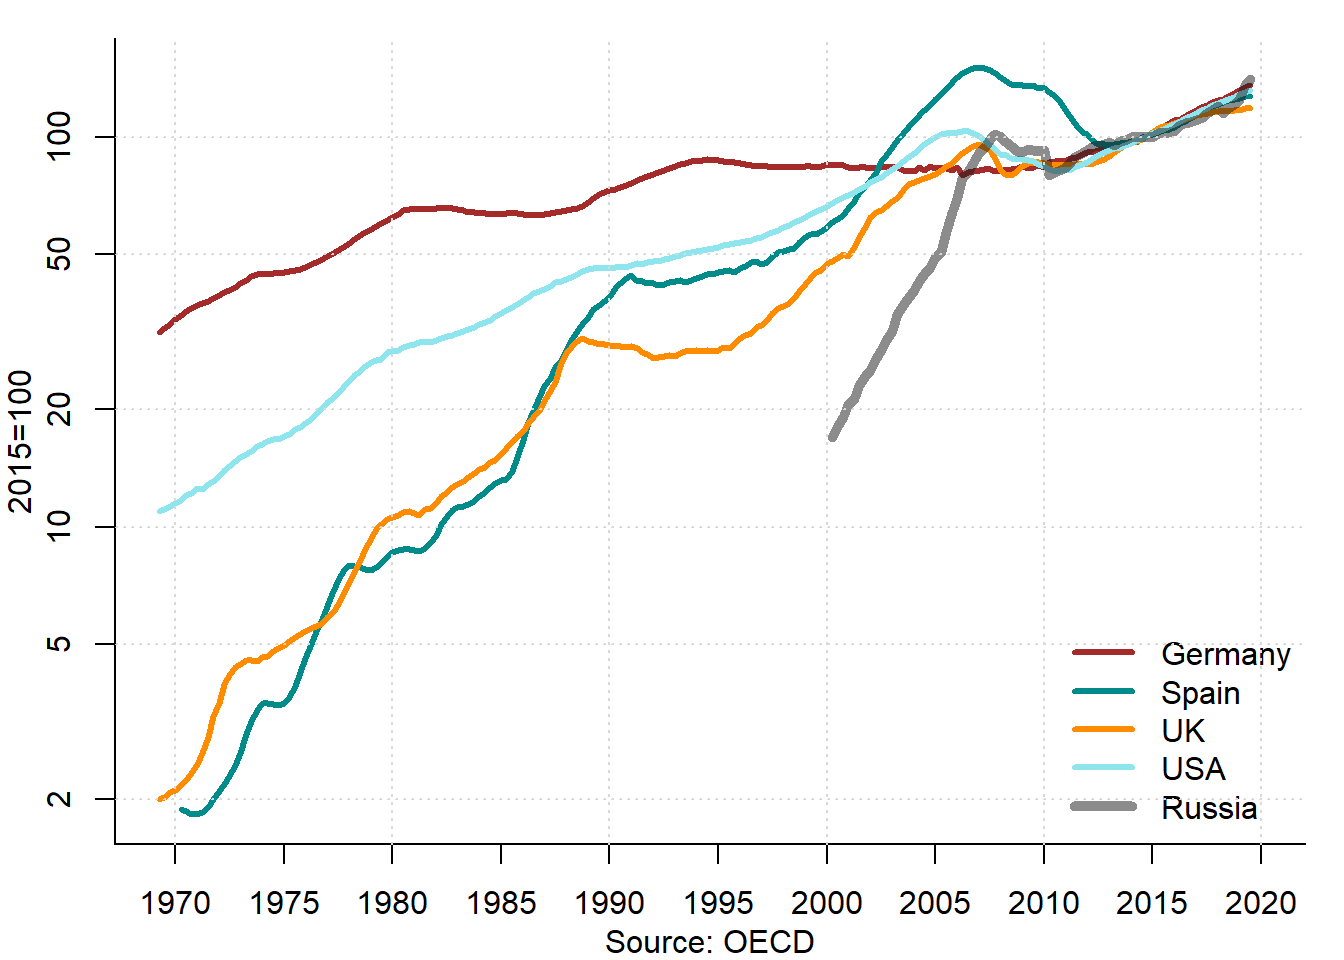 Housing prices in selected countries, 1970--2020